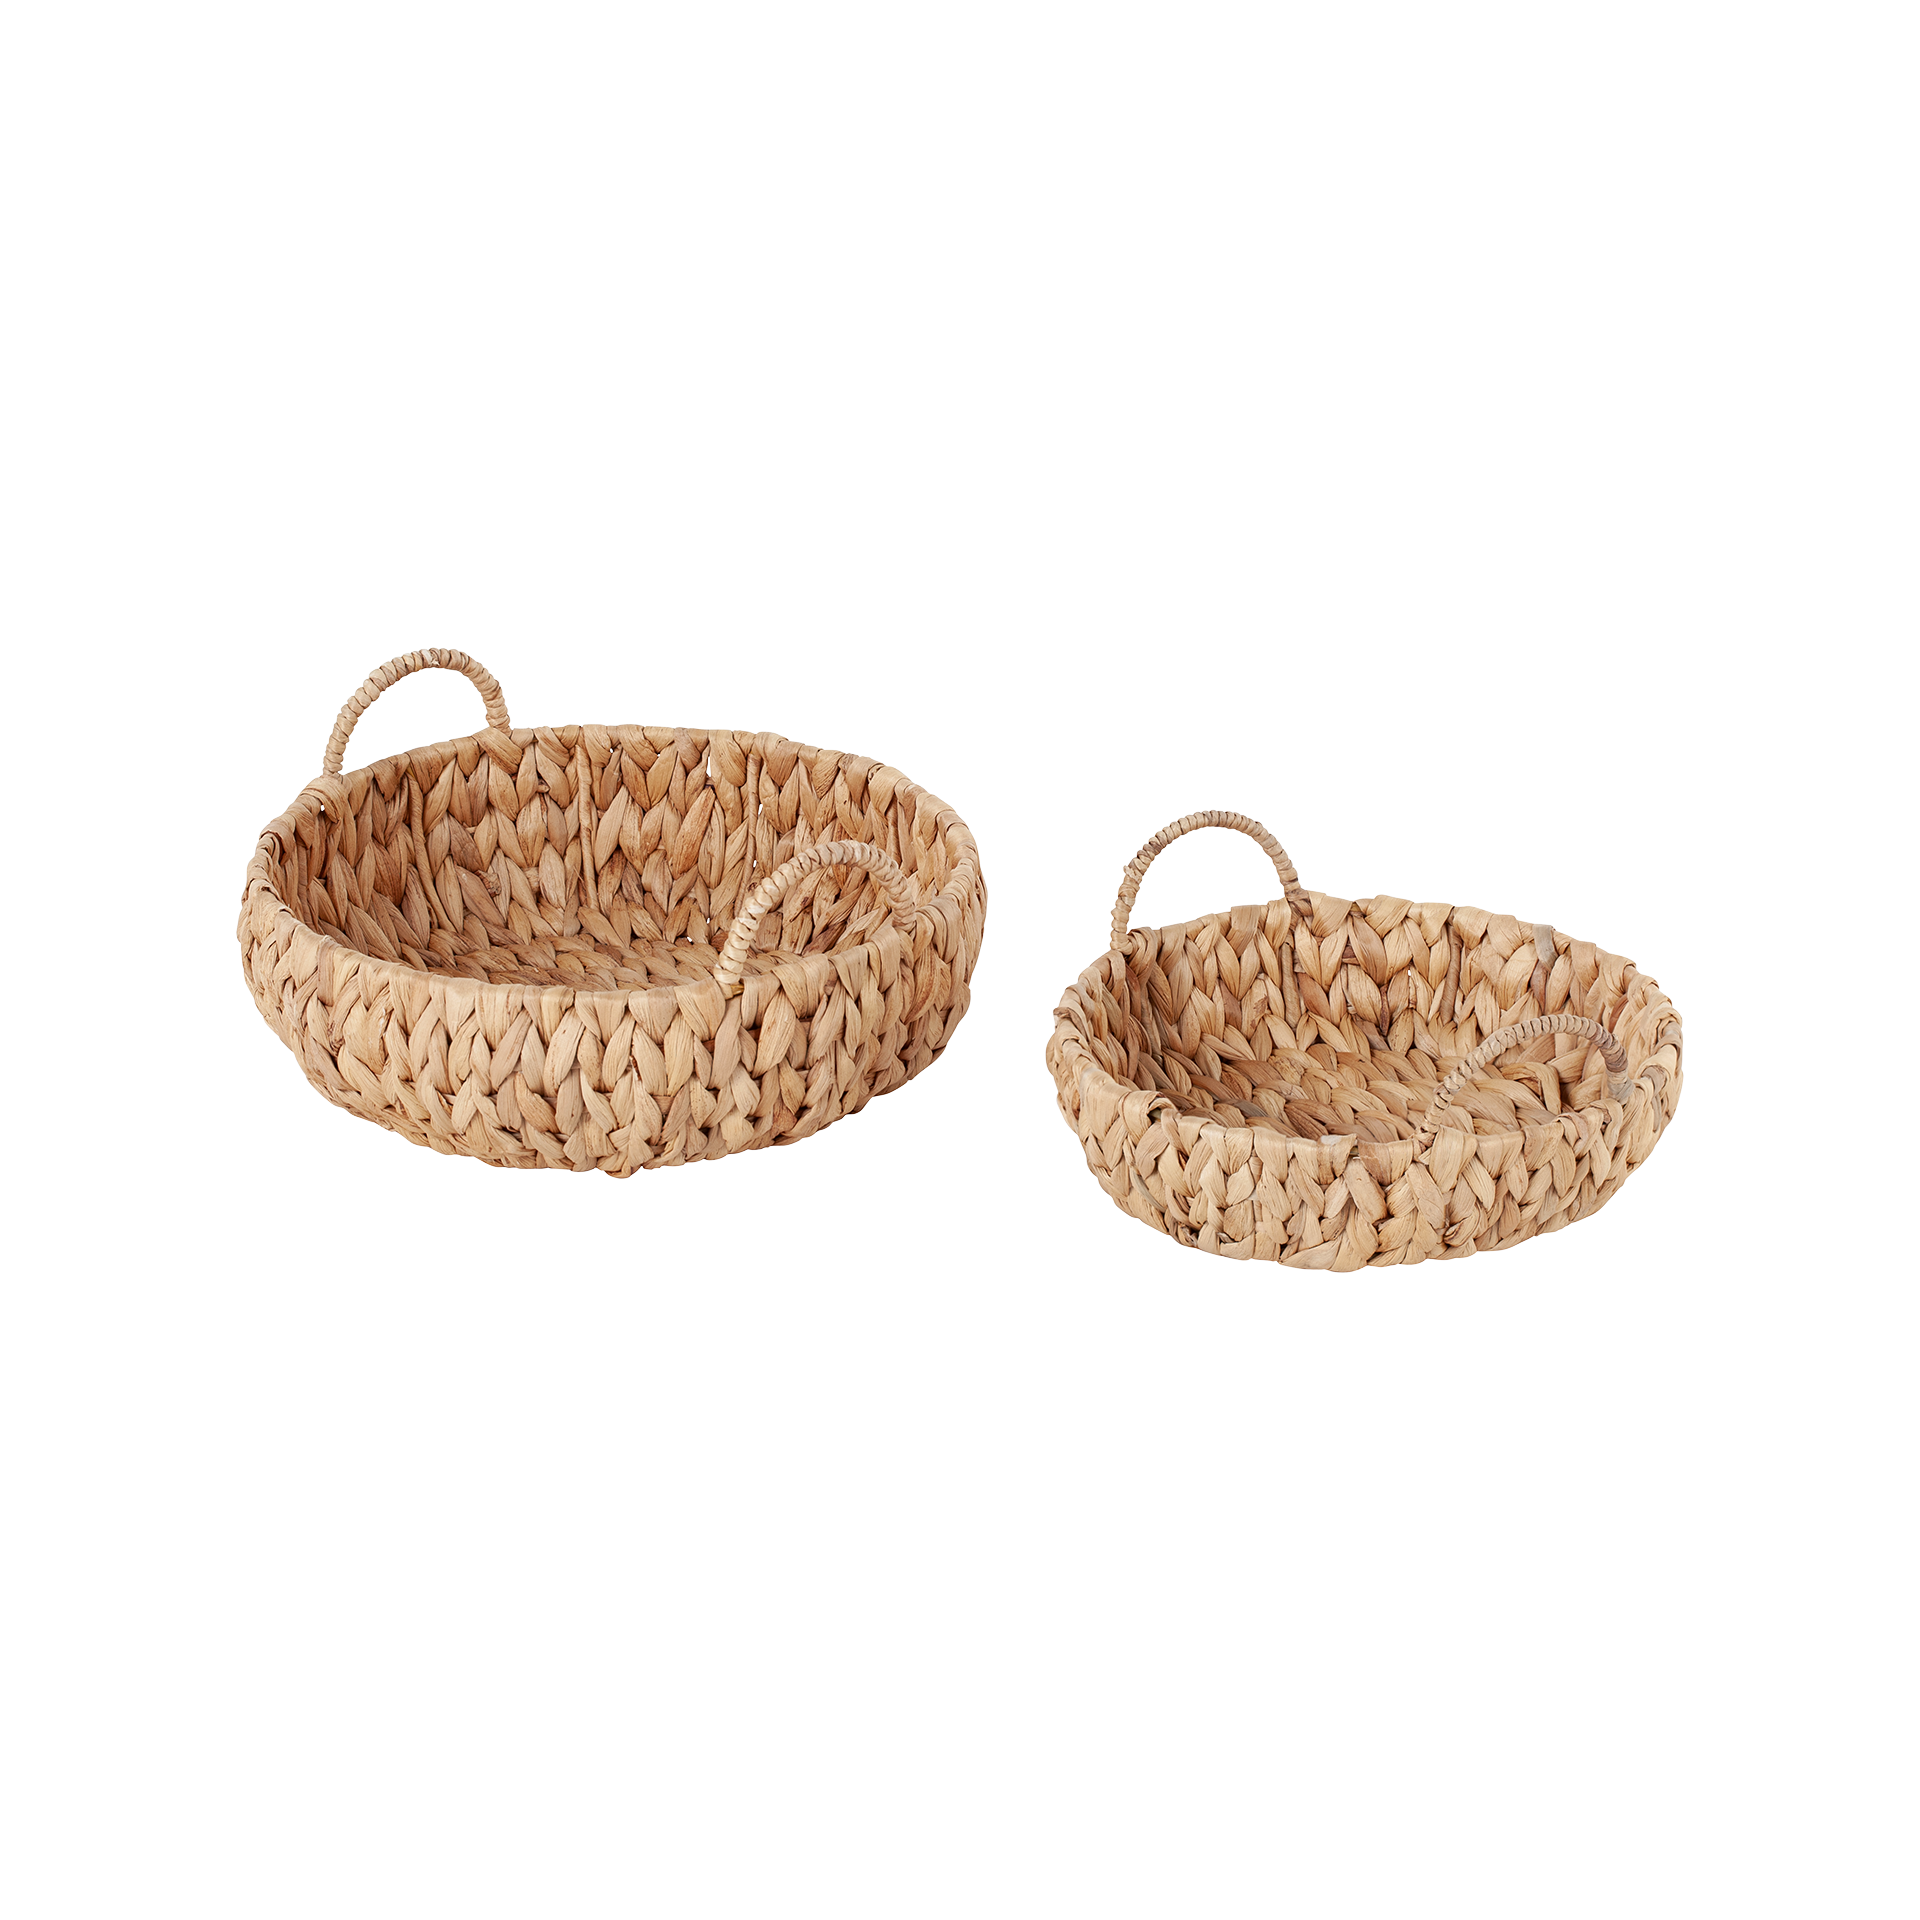 Round bread basket with handles Lily, made of water hyacinth S/2